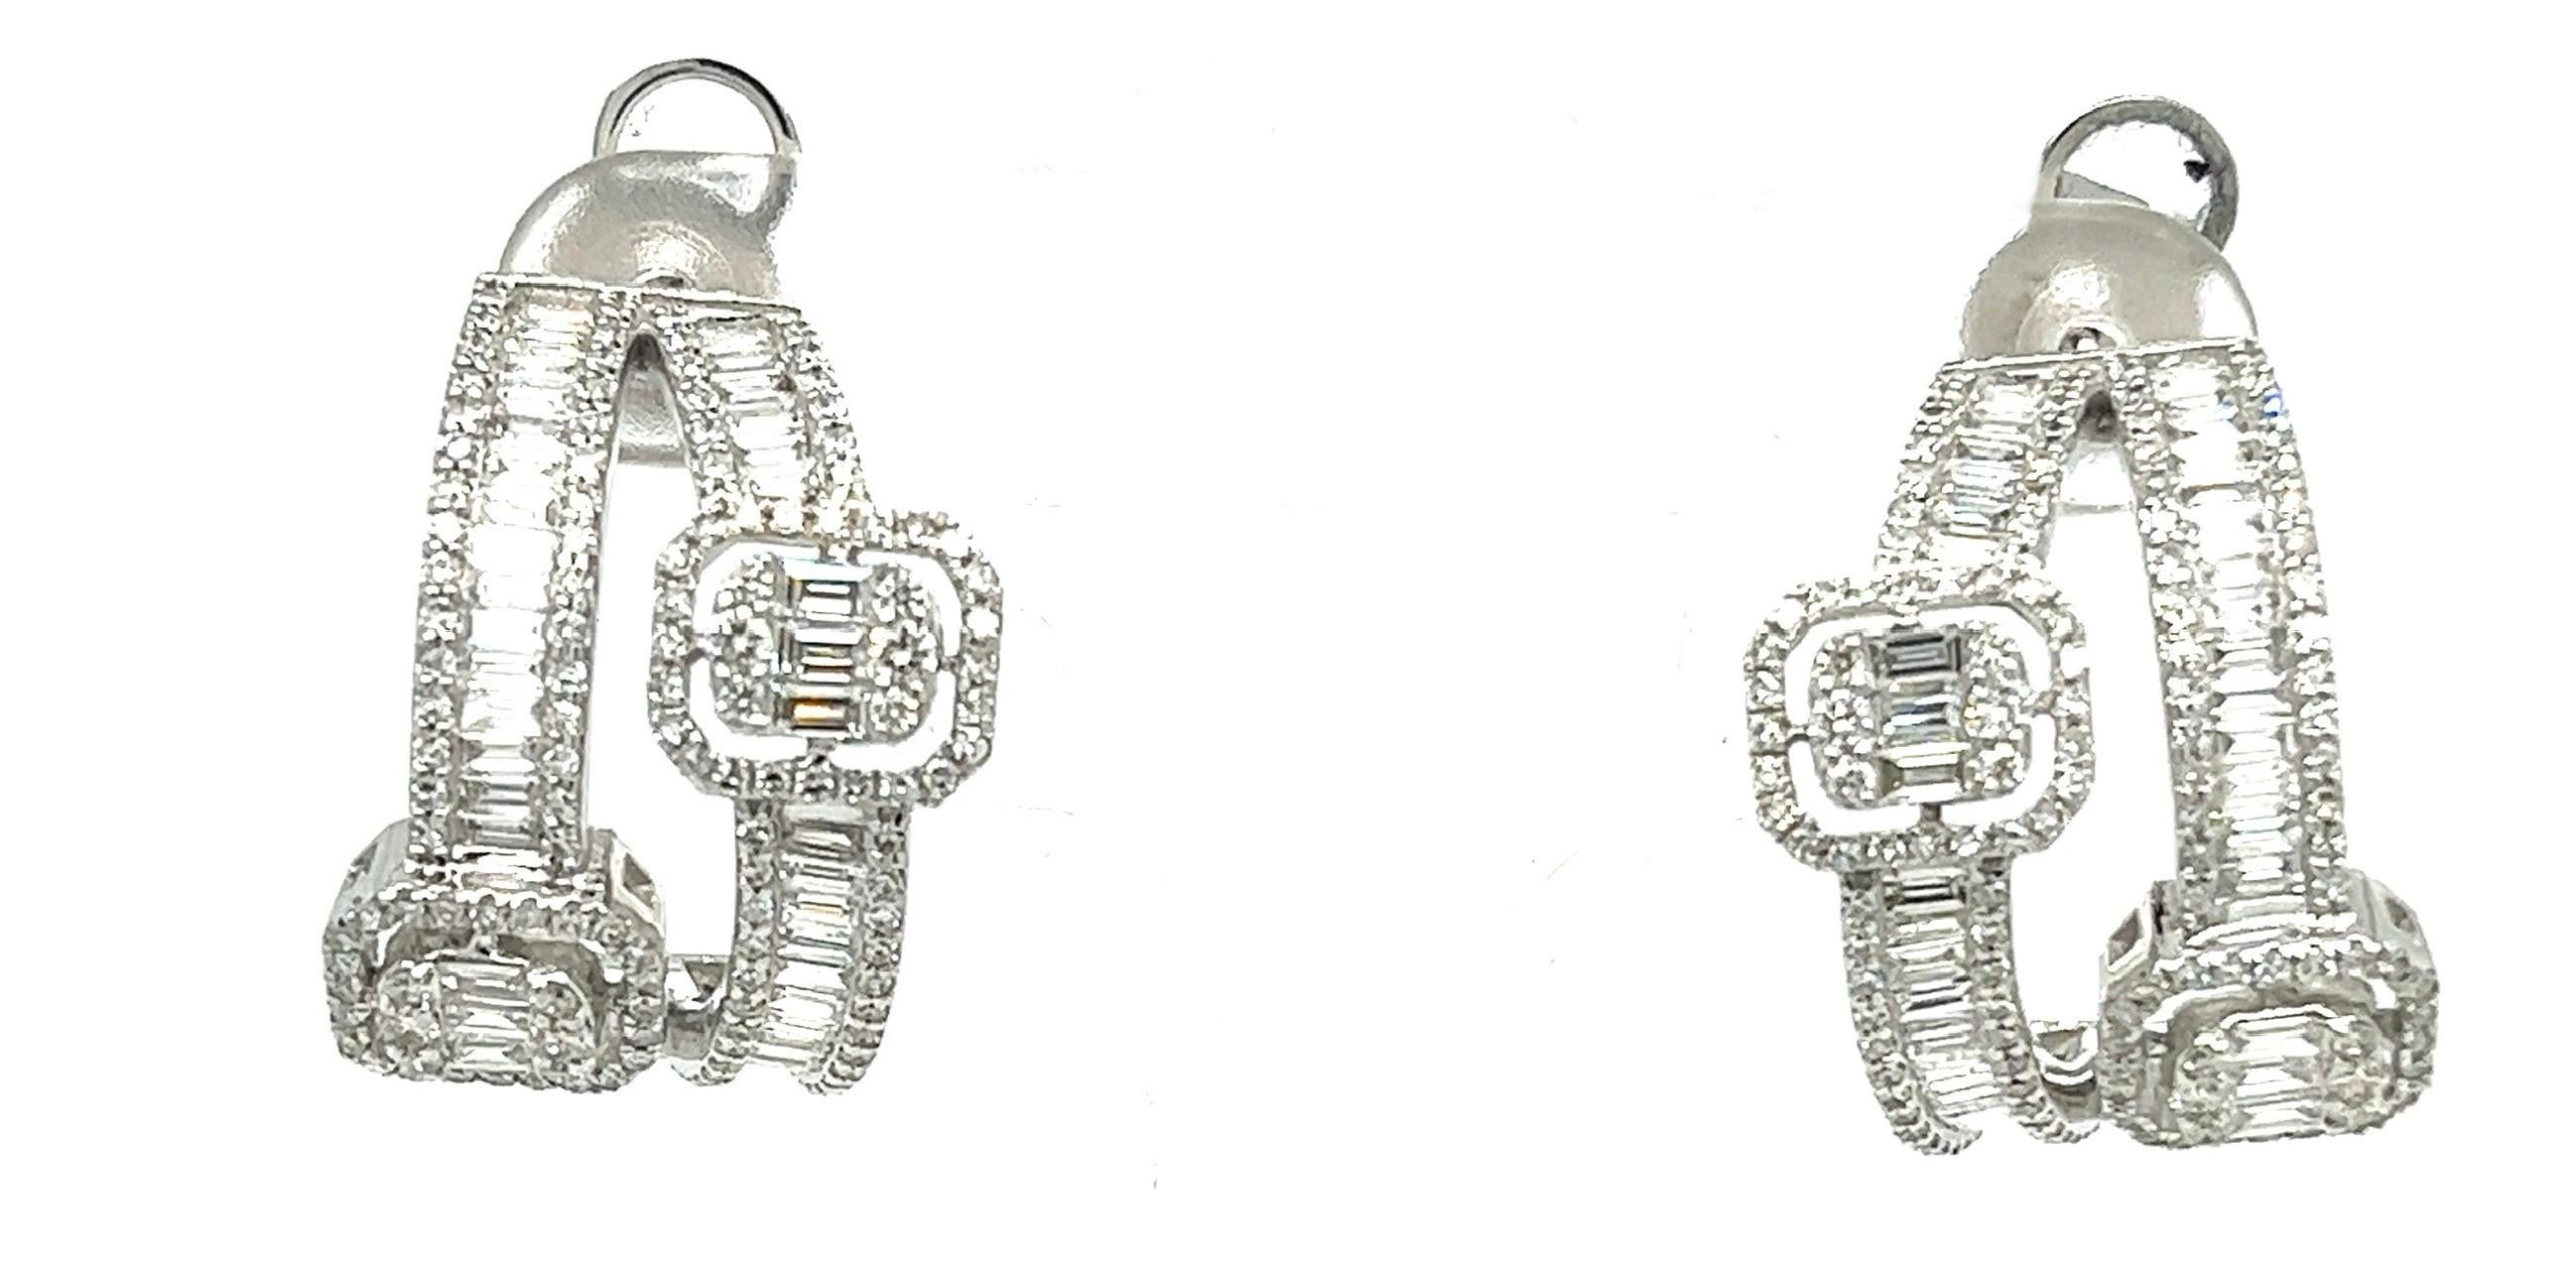 18K White Gold Earrings with Diamonds
18K White Gold - 9.69 GM
373 Diamonds - 2.40 CT

Adorned with various-cut diamonds, Althoff Jewelry classical 18K gold earrings will add a touch of flawless purity to your daily style.
The diamonds catch the